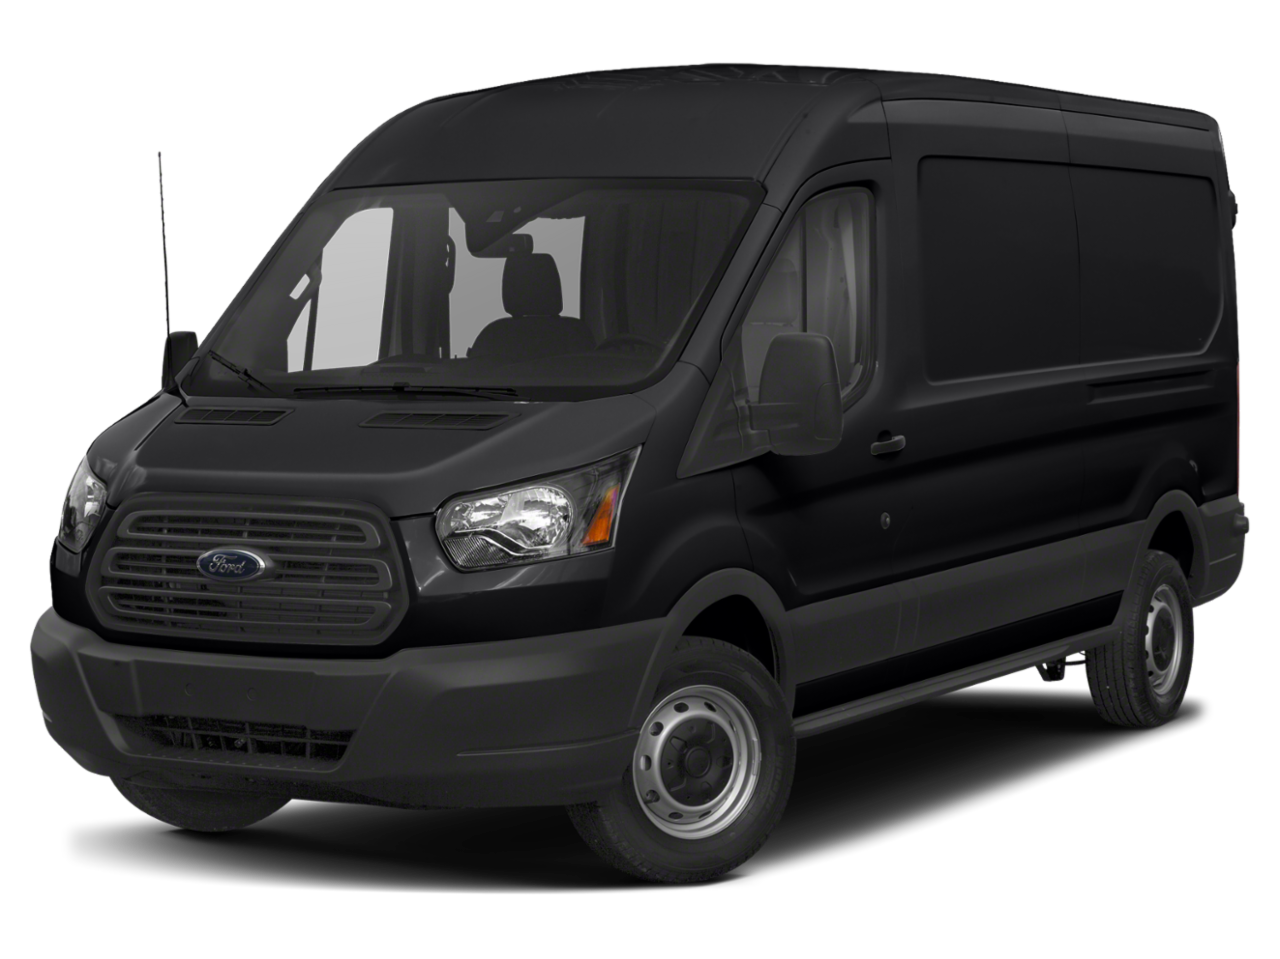 2019 Ford Transit-250 Repair: Service and Maintenance Cost